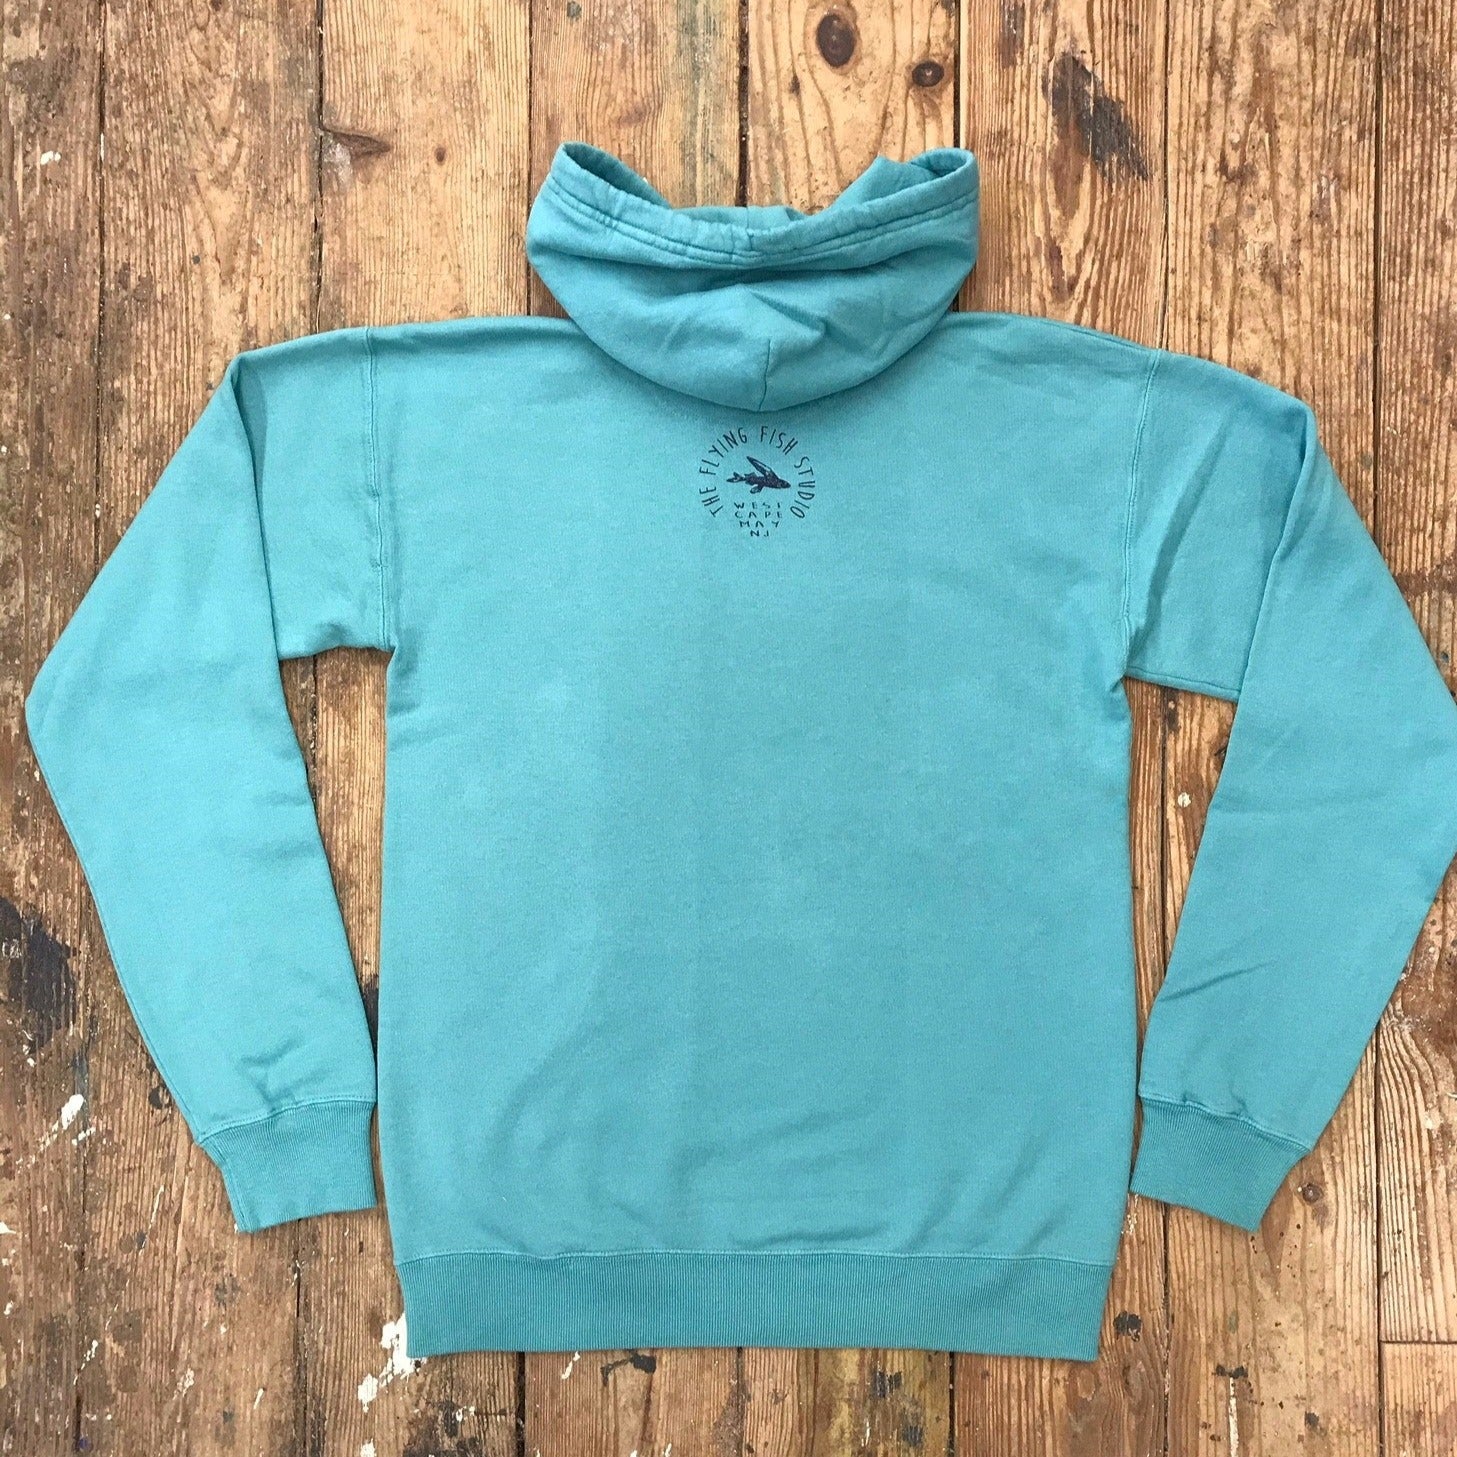 Seafoam Green hoodie featuring the 'Flying Fish' logo on the back neck in navy ink.